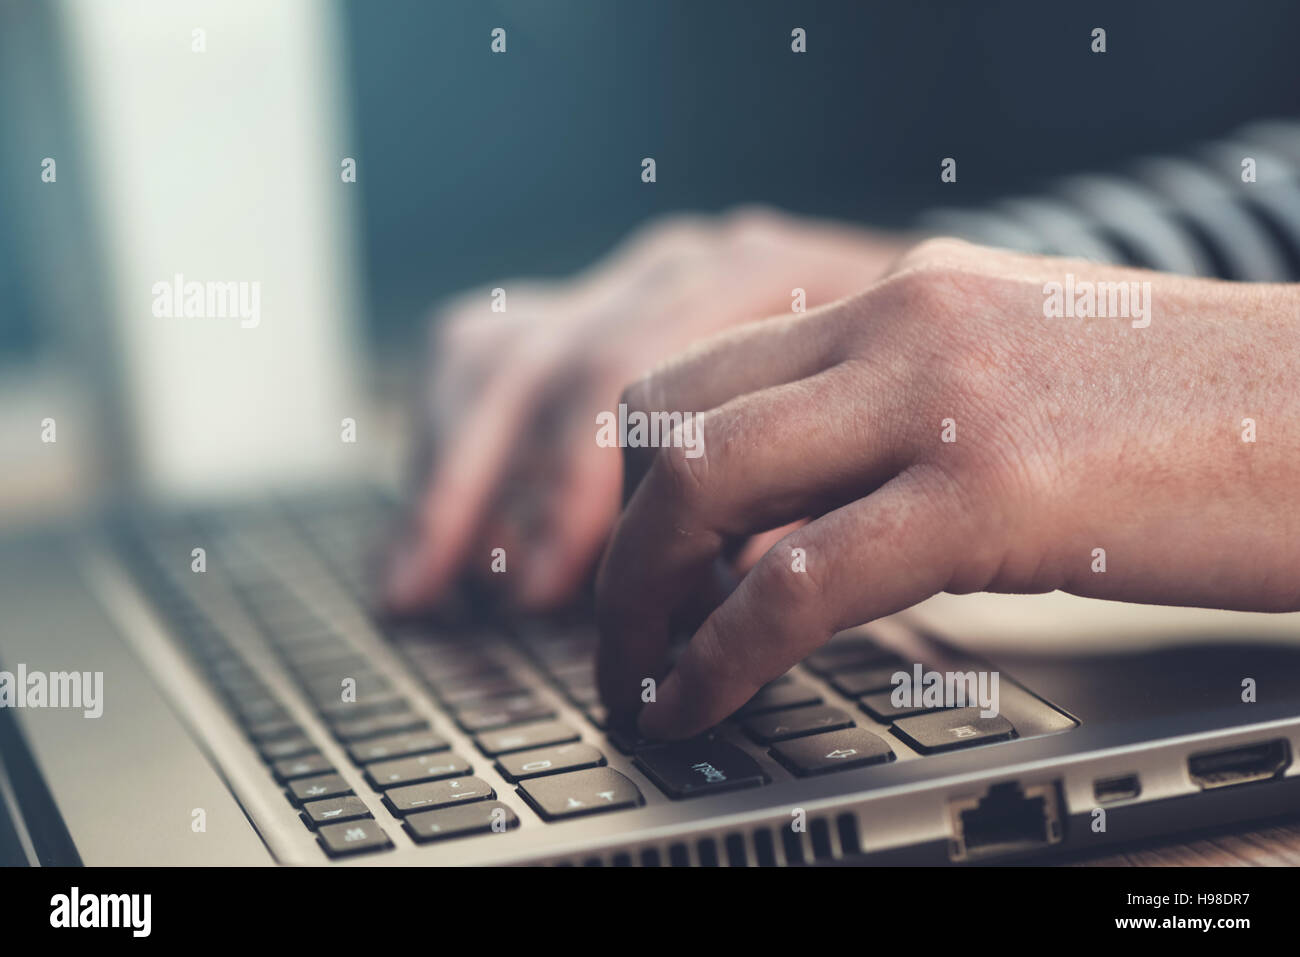 Female hands typing on laptop keyboard, woman working on computer in the office Stock Photo